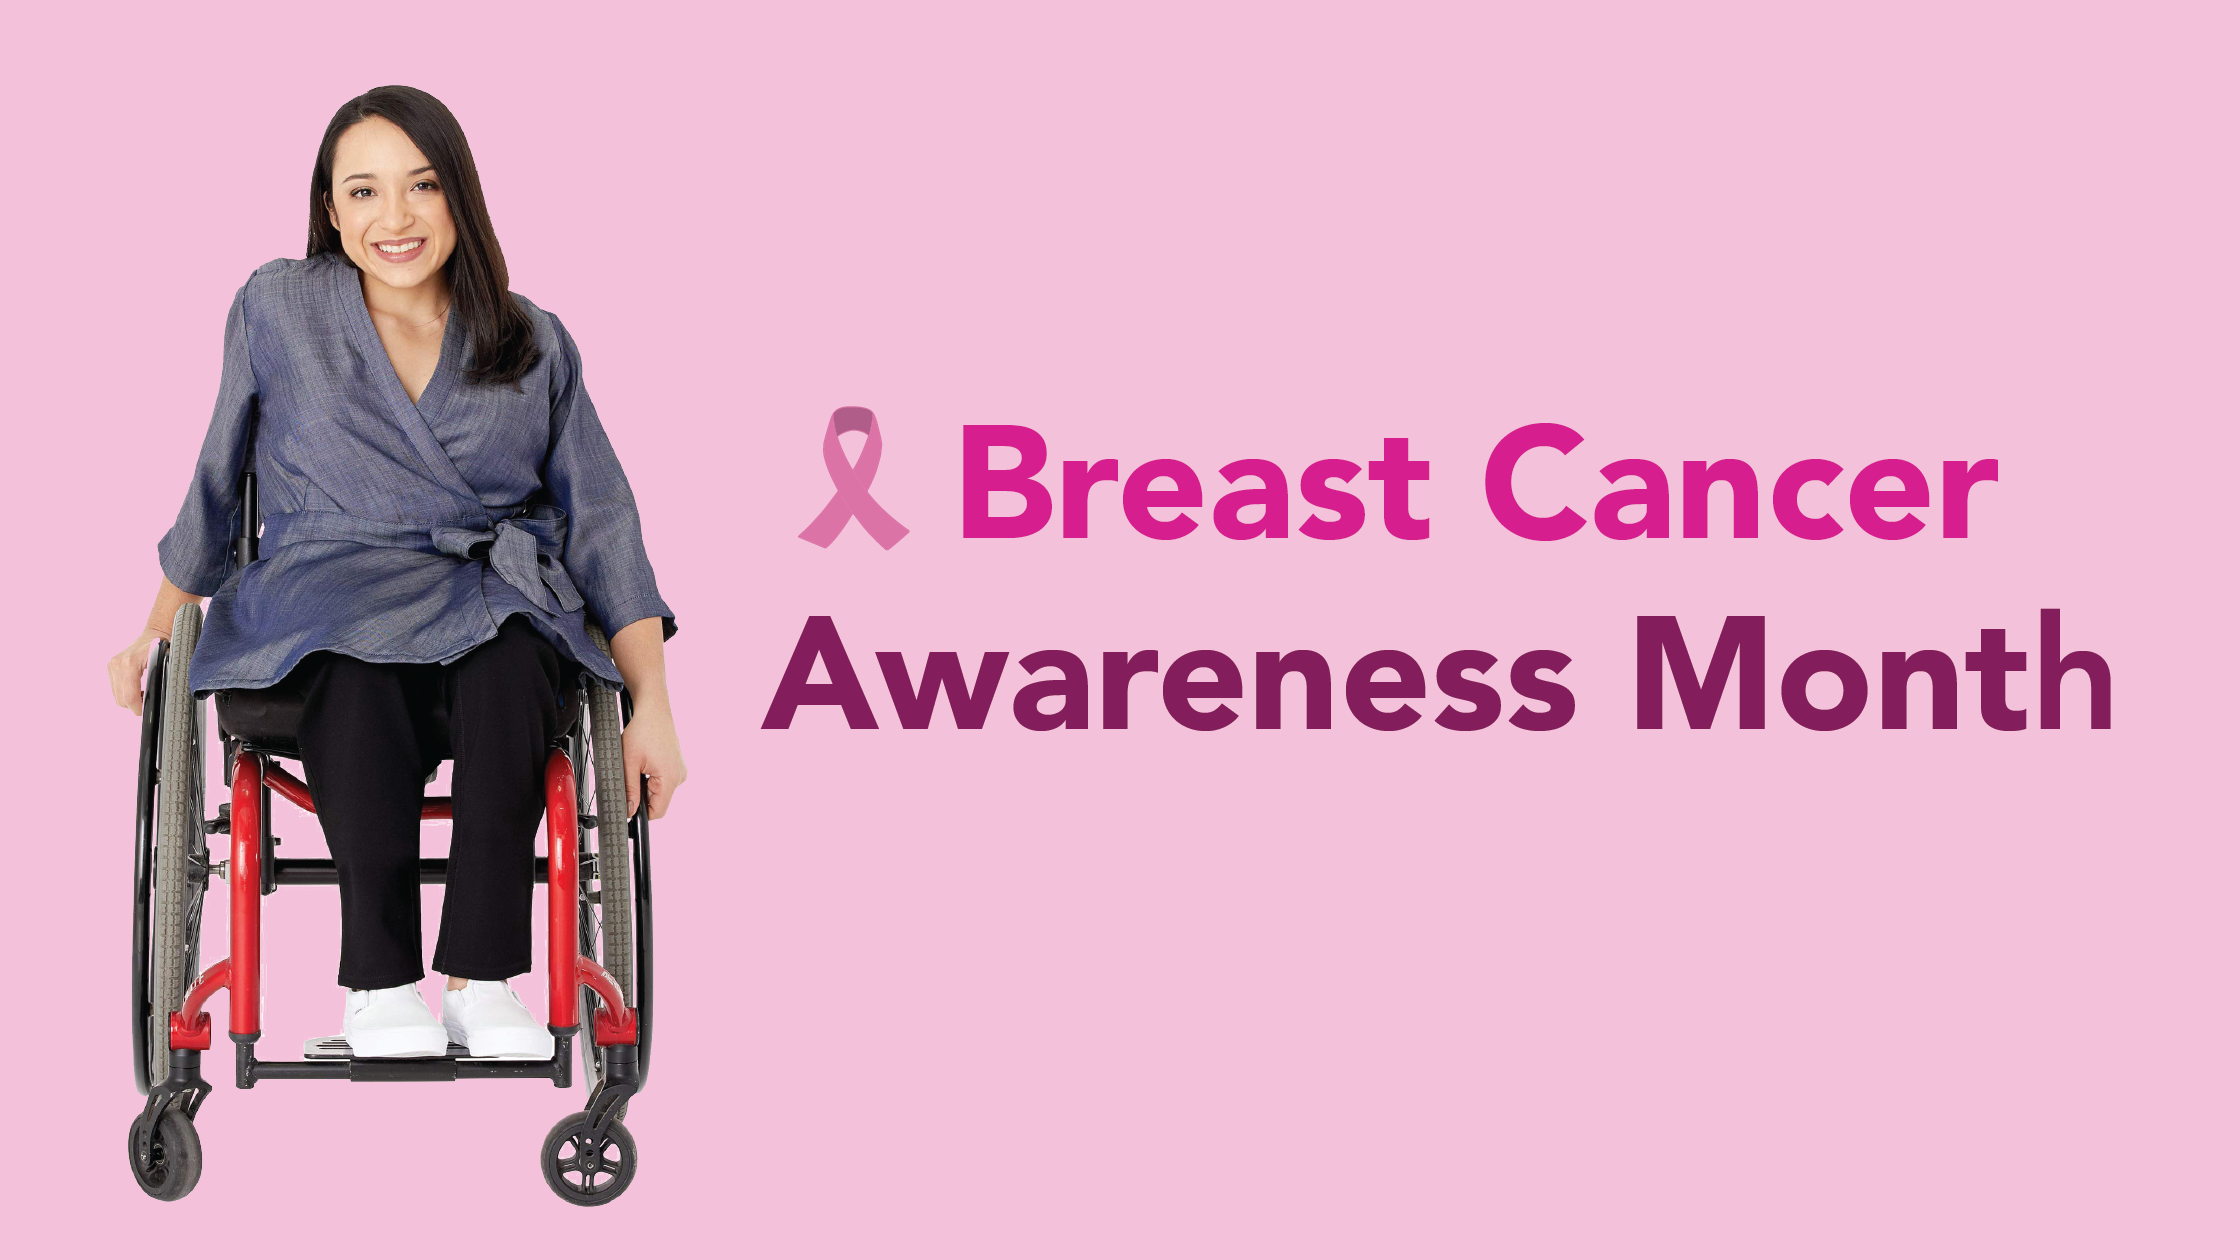 graphic with text "breast cancer awareness month" with image of woman seated in a wheelchair wearing the recovery blouse